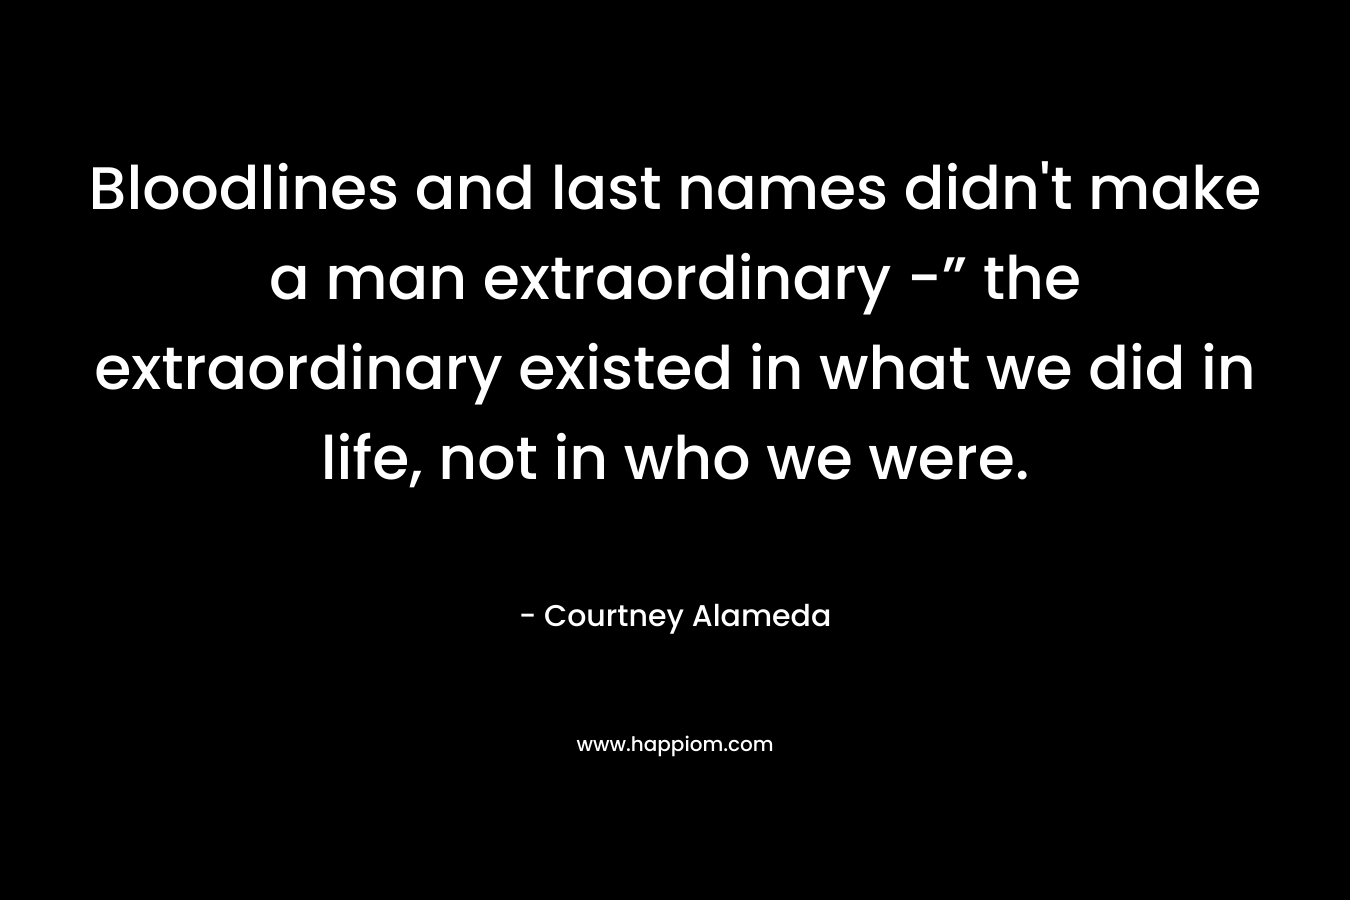 Bloodlines and last names didn't make a man extraordinary -” the extraordinary existed in what we did in life, not in who we were.